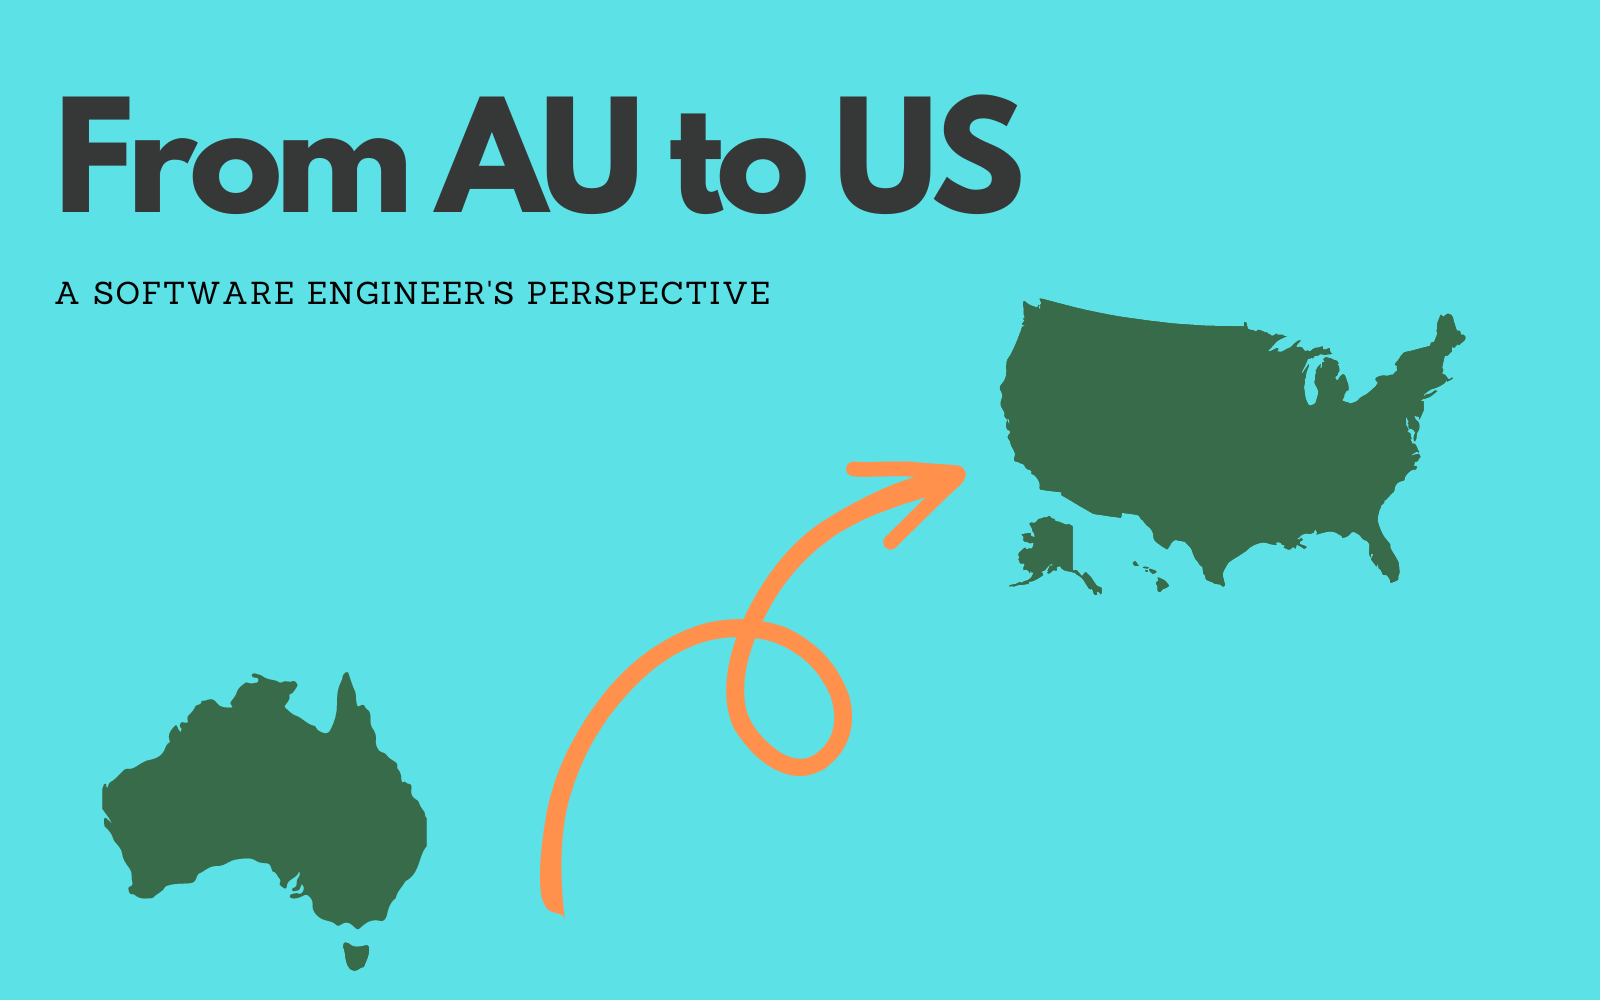 [Part I] Relocating from Australia to the US: My Experience as a Software Engineer